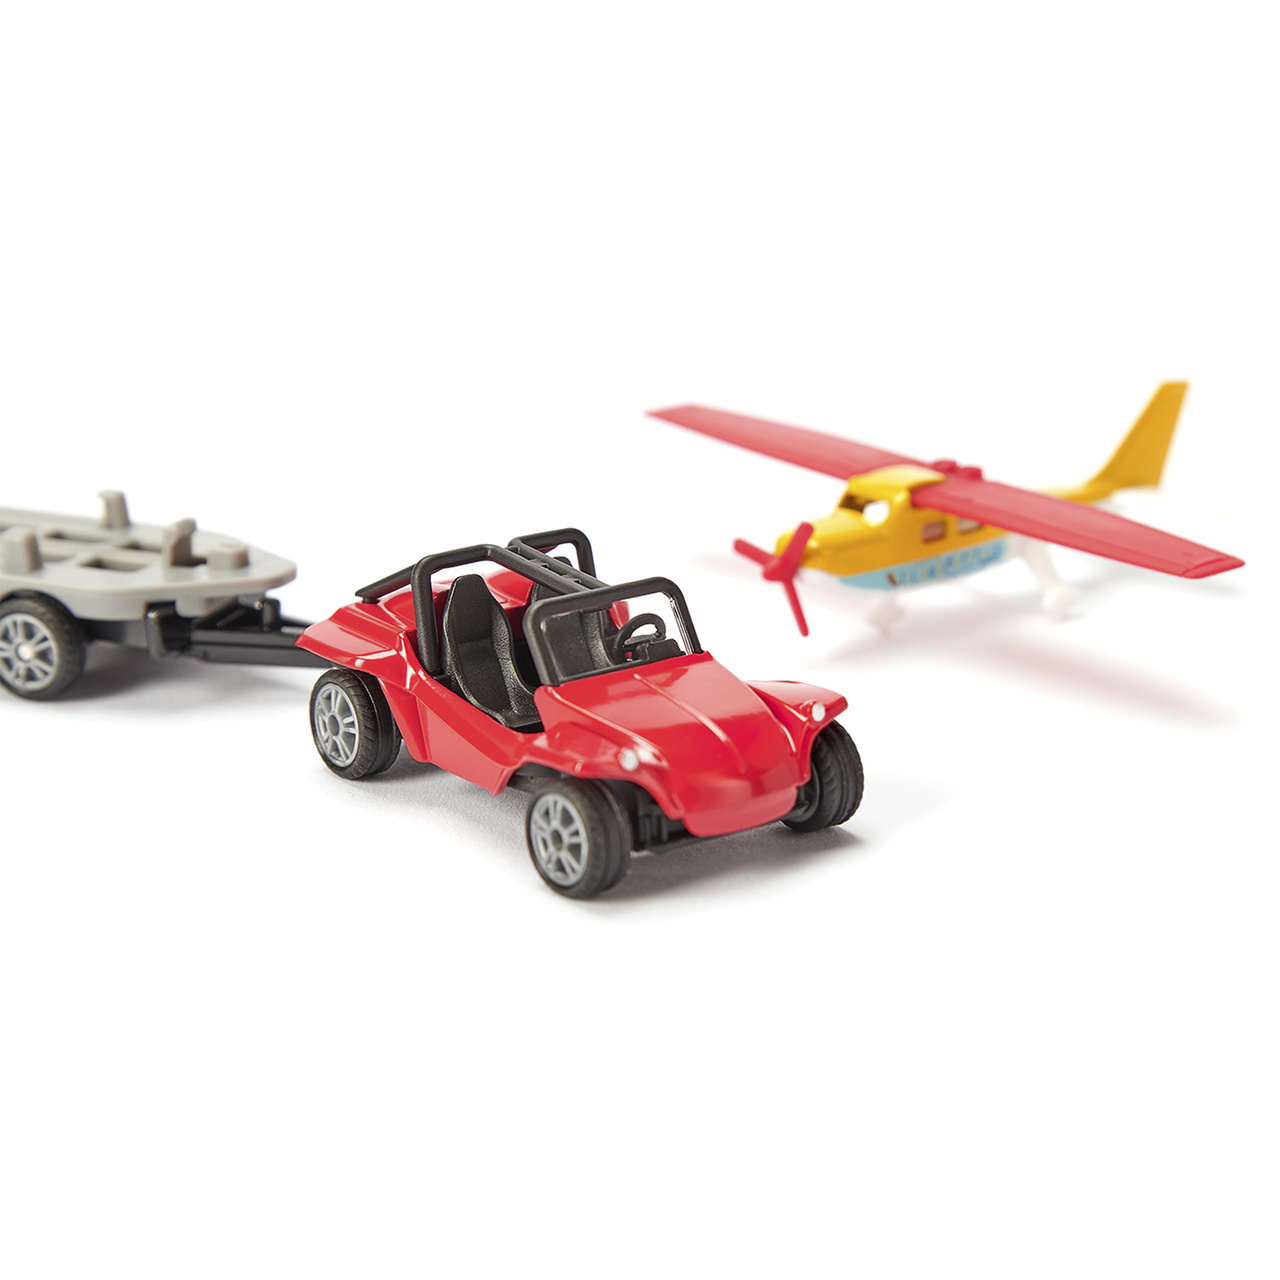 Toy planes & boats siku buggy with sporting airplane